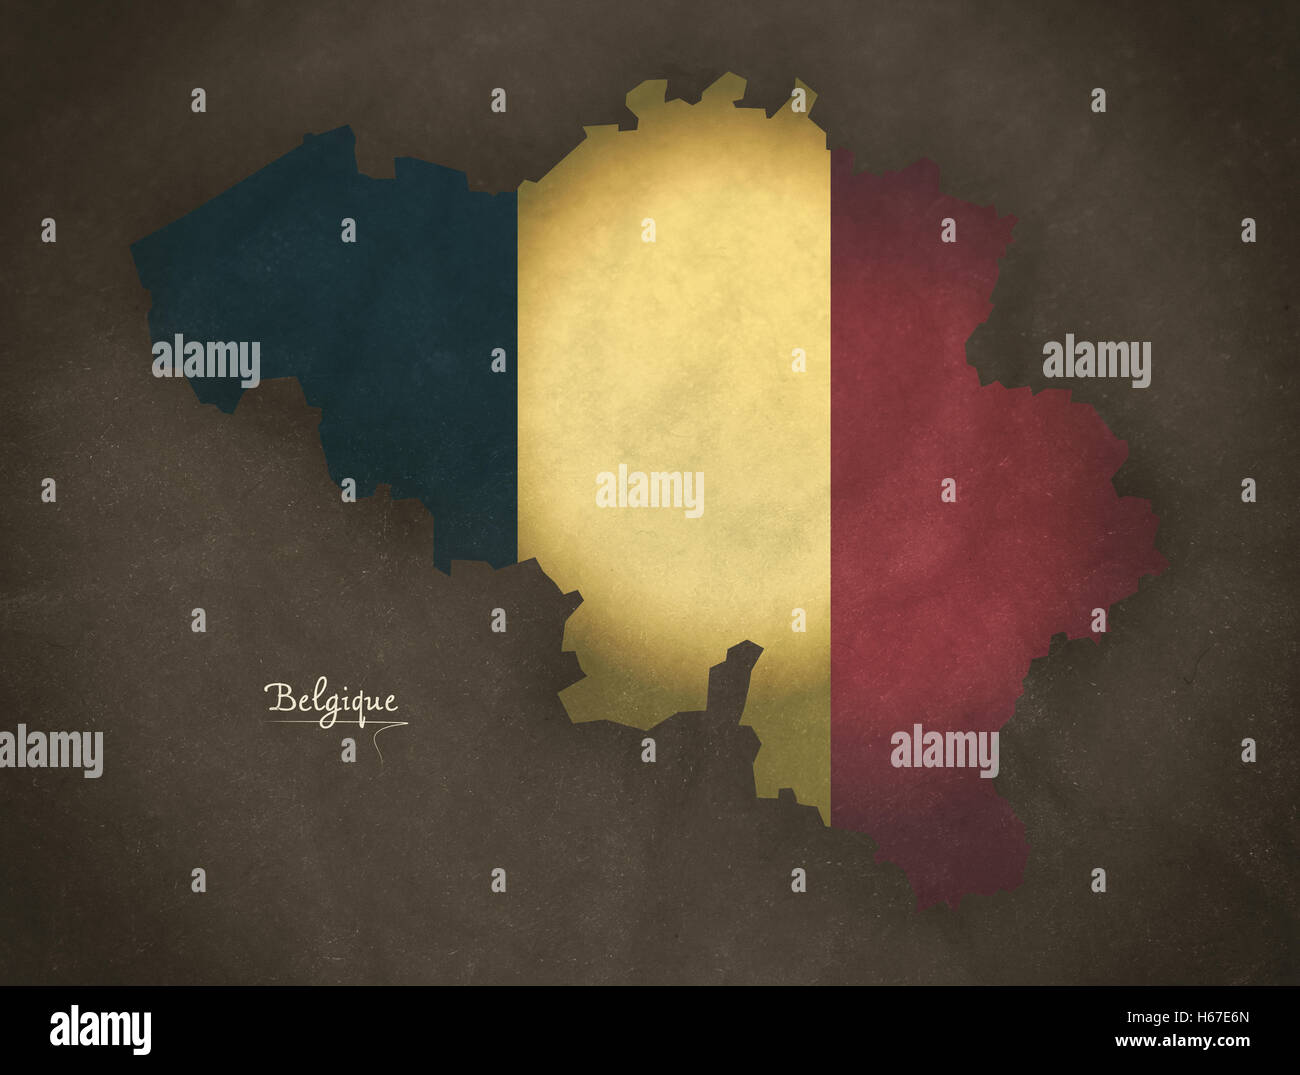 Belgium map special vintage artwork style with flag illustration Stock Photo